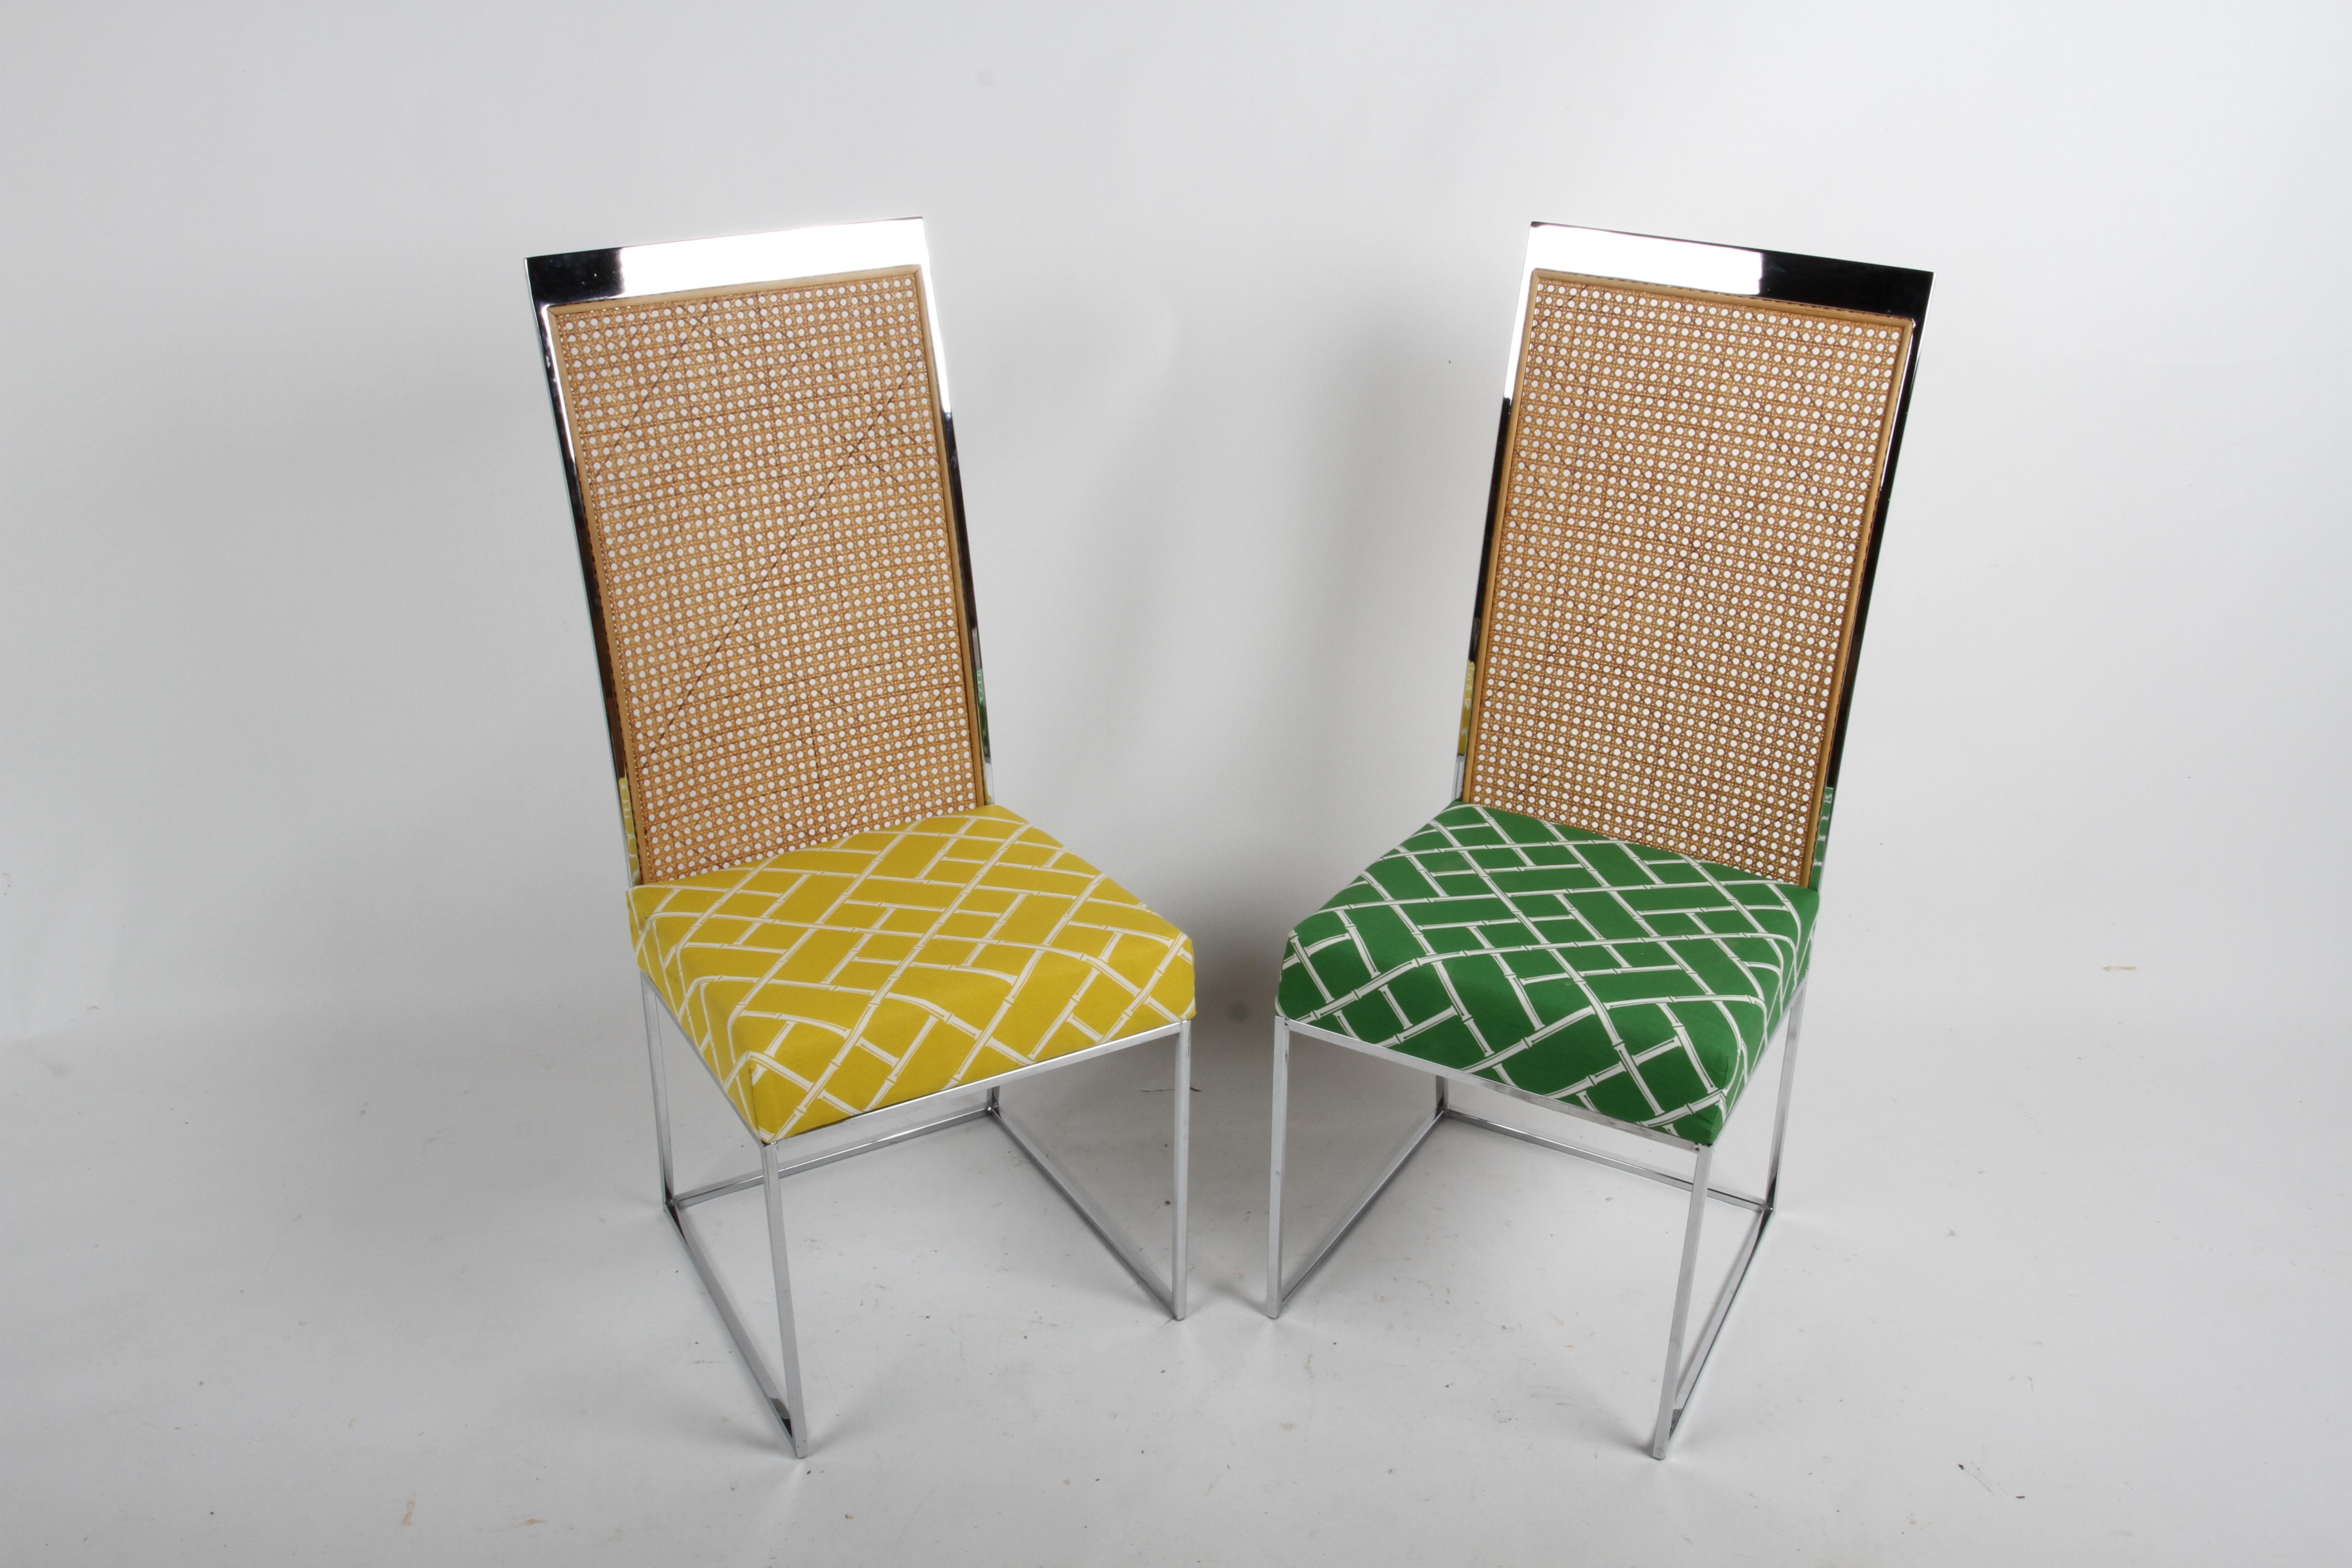 Sleek Mid-Century Modern set of eight chrome & cane back side dining chairs designed by Milo Baughman for Thayer Coggin circa 1970s. Each chair having a thin simplistic chrome frame with cane rattan high backs and upholstered seat cushions. The